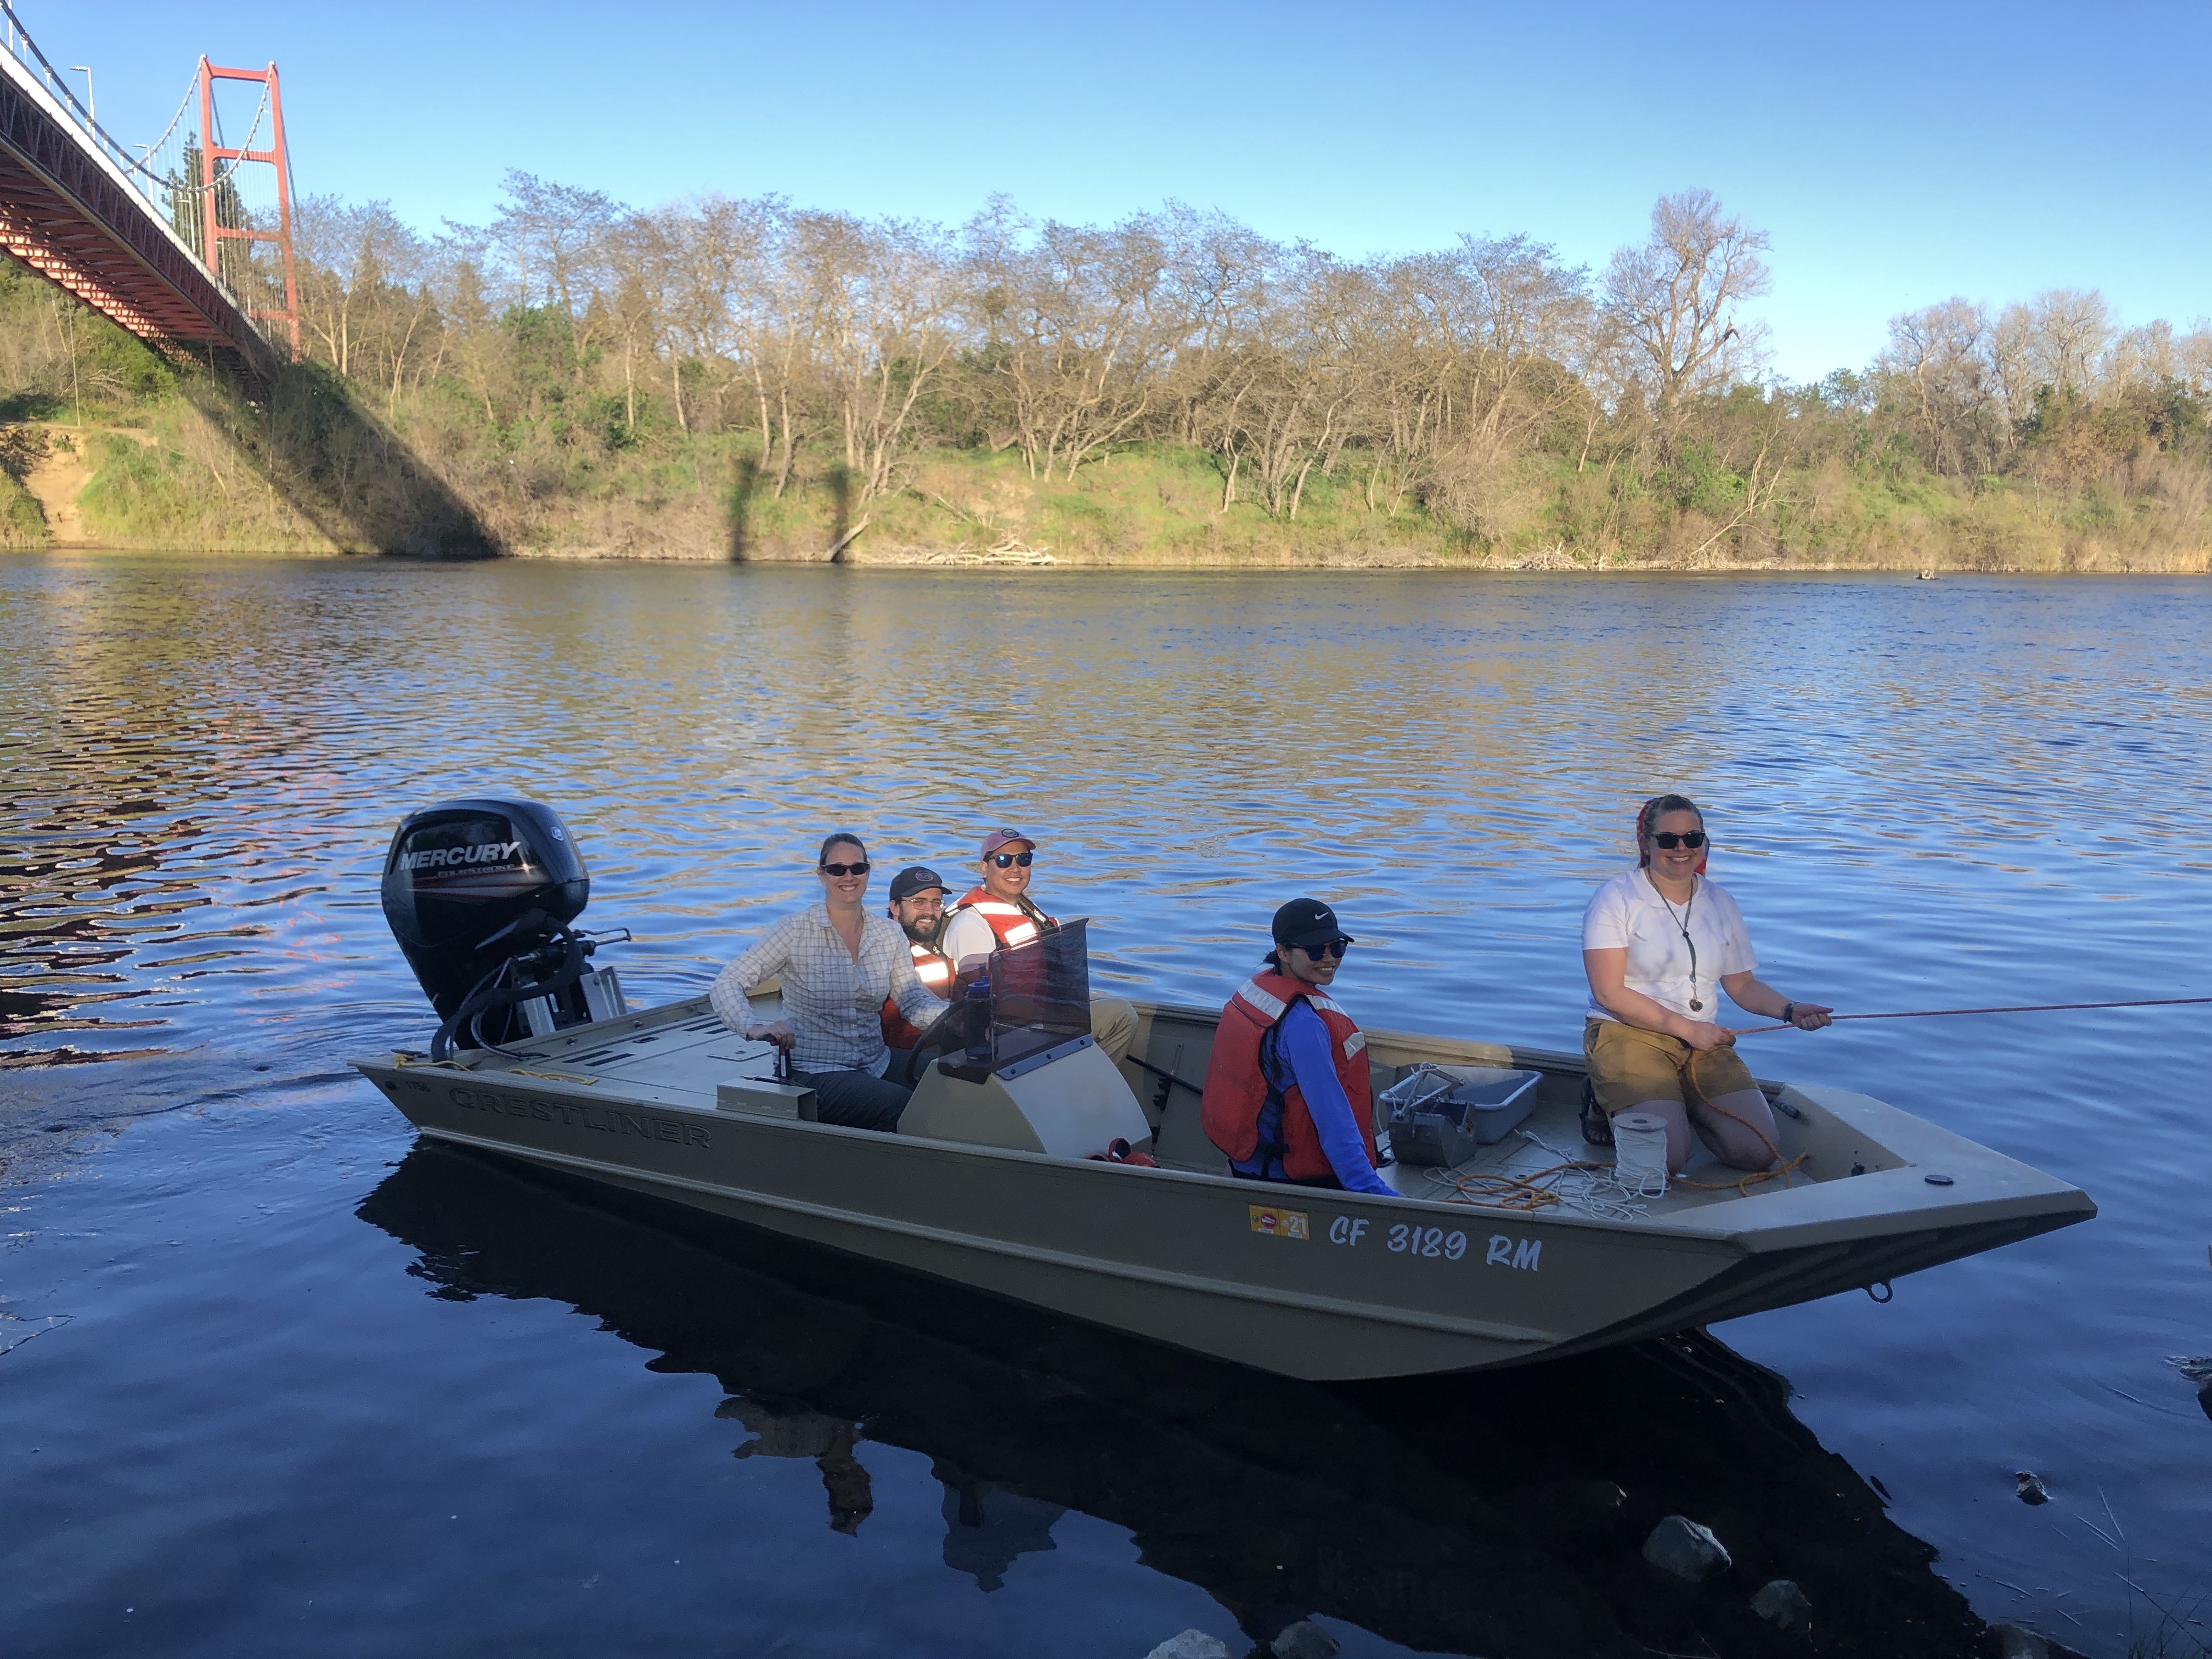 Students and faculty in a boat on the American River